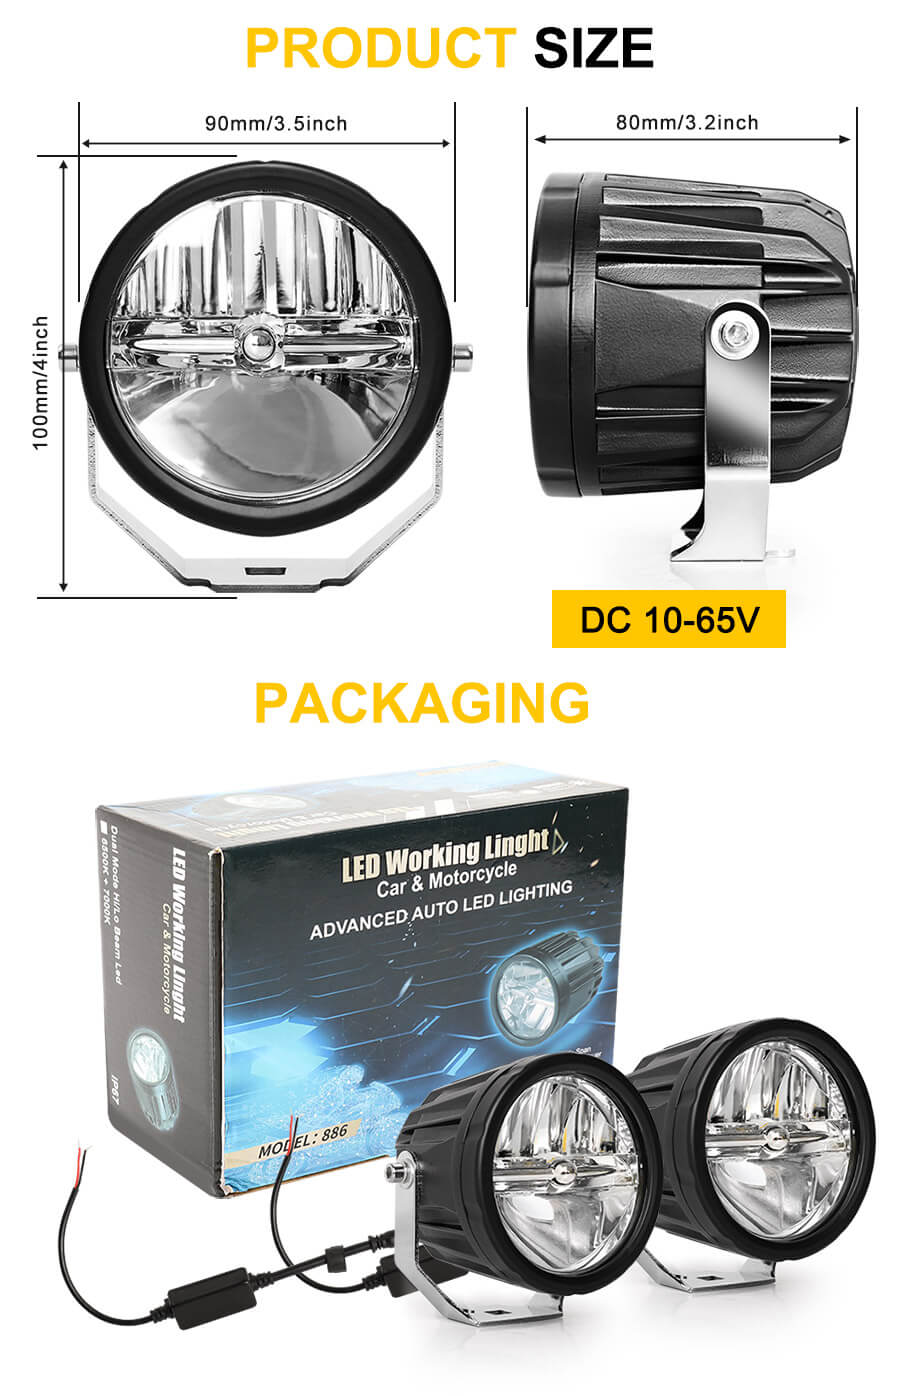 Eagle Series ® 3.5 Inch Dual Color Led Auxiliary Light JG-1000H-HS size